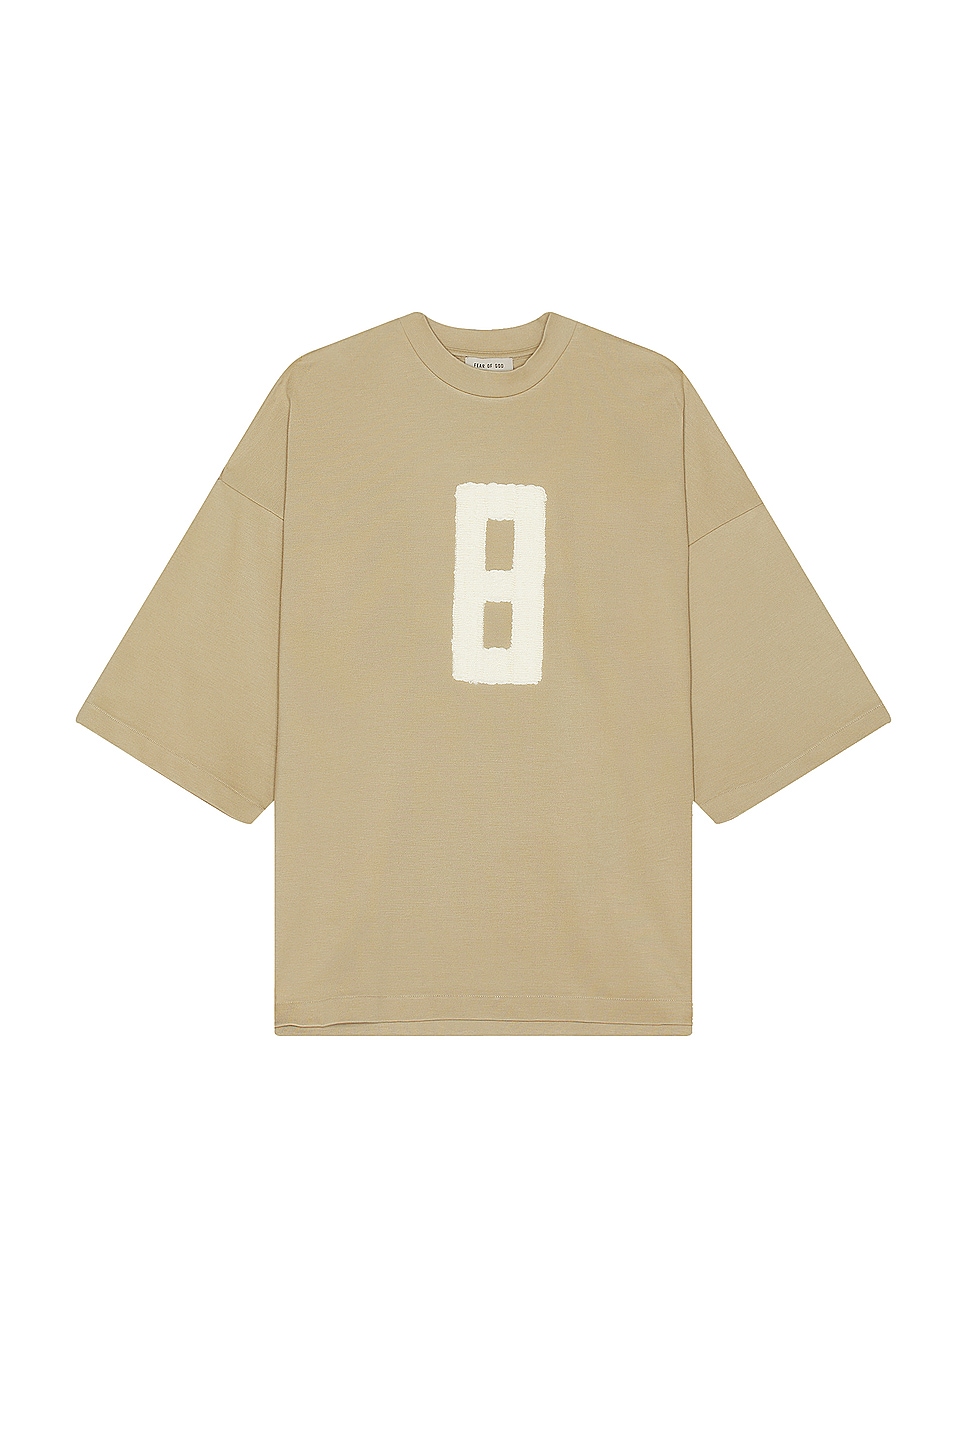 Image 1 of Fear of God Embroidered 8 Milano Tee in Dune